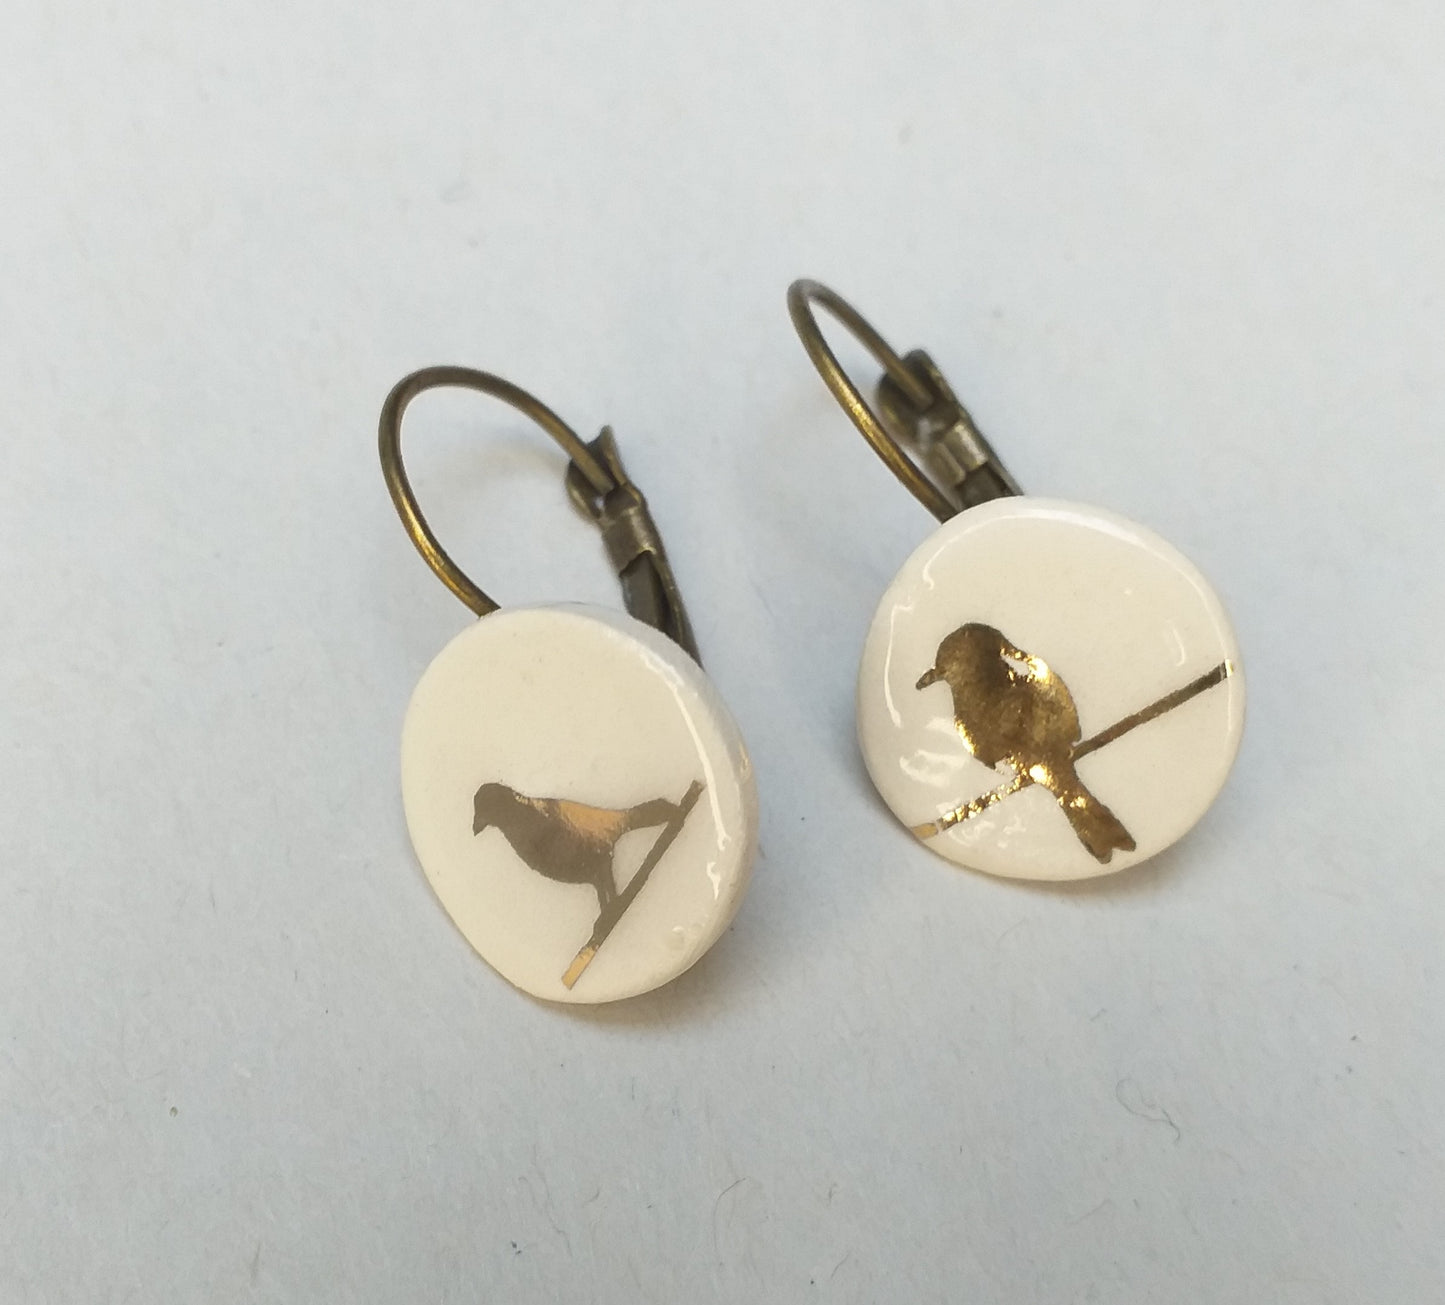 Small Ceramic Earrings with lever back fitting.